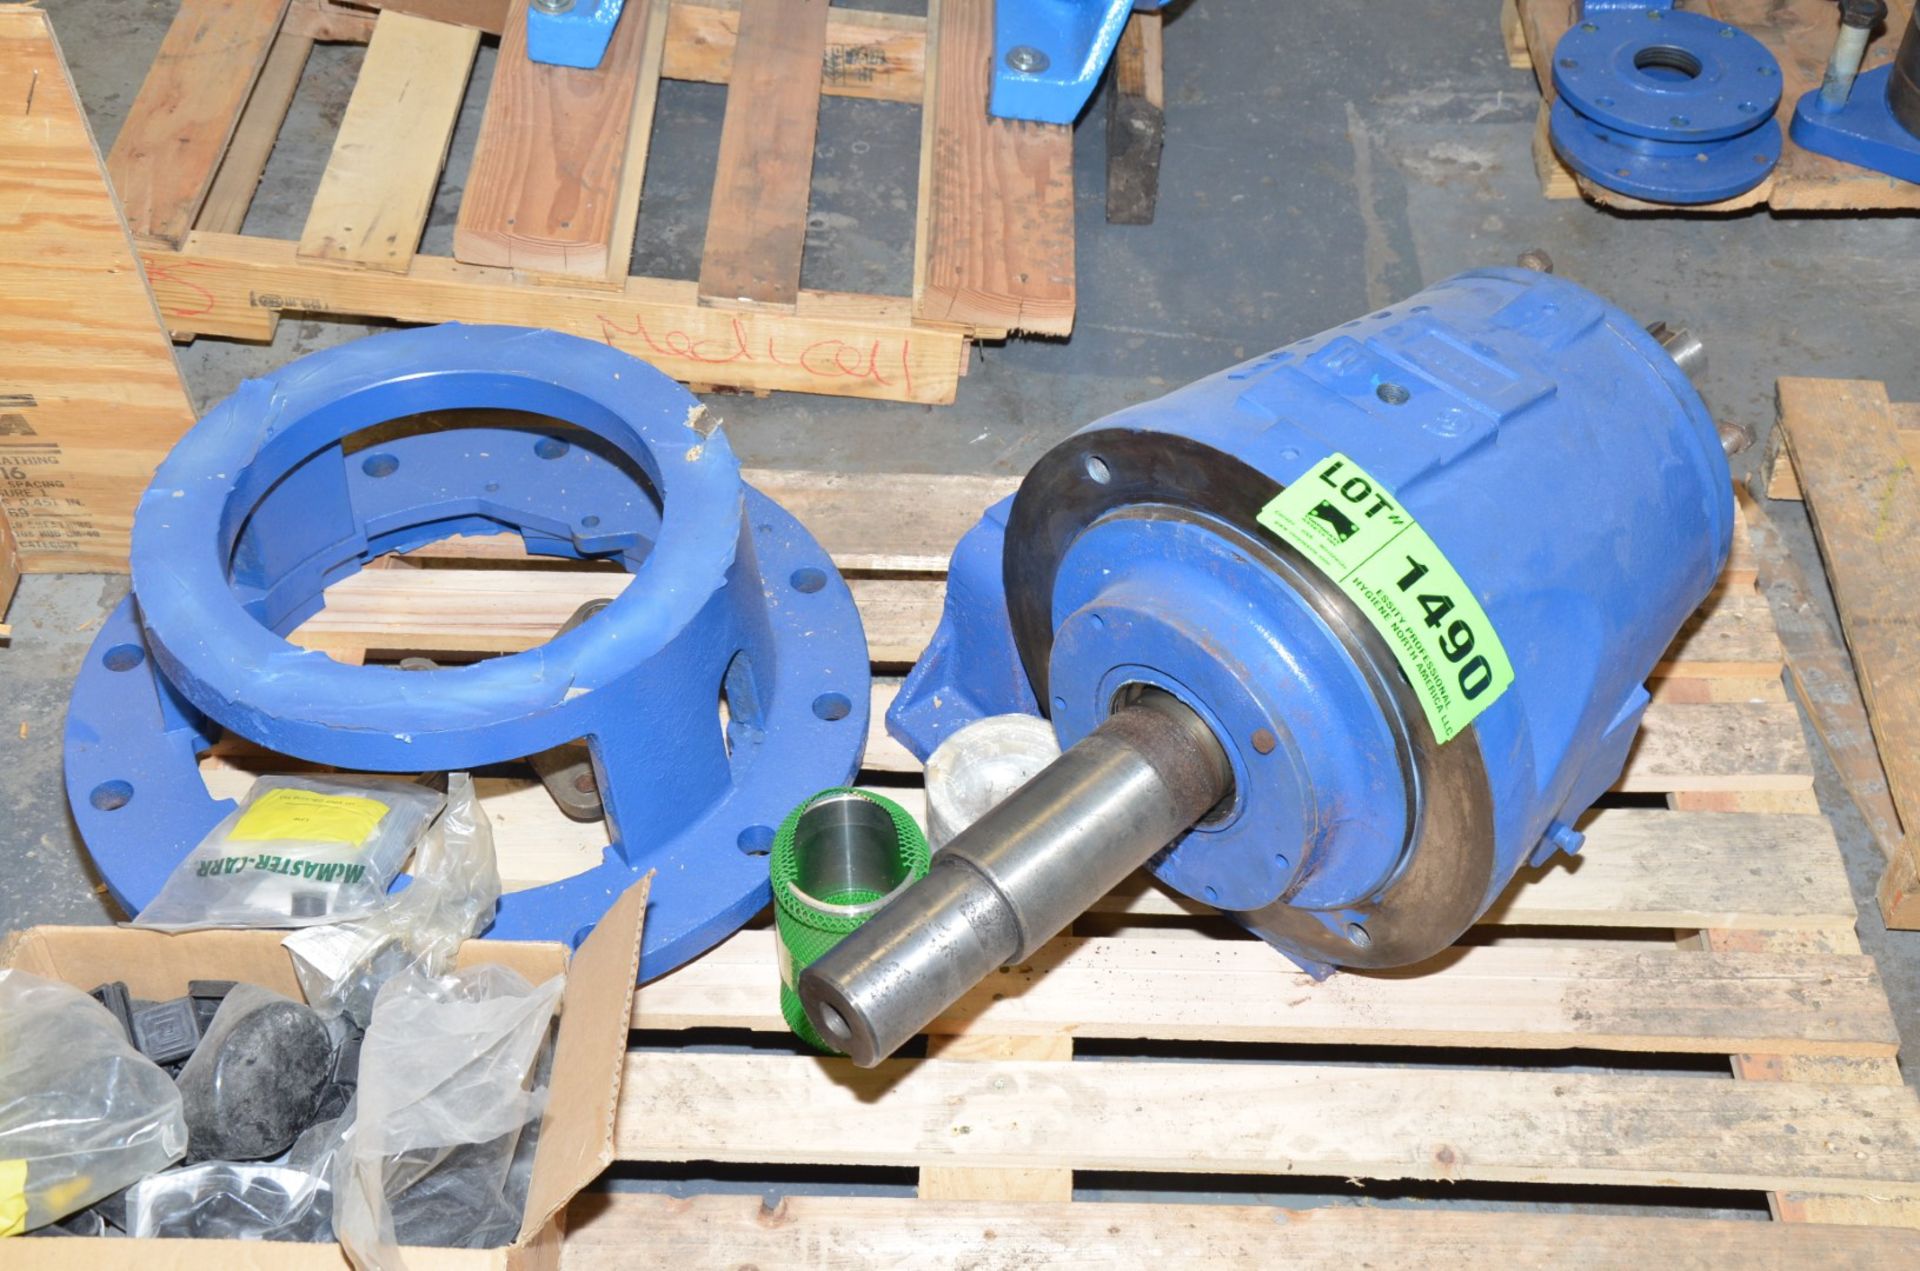 GOULDS PUMP ROTARY ASSY WITH FRAME [RIGGING FEE FOR LOT #1490 - $25 USD PLUS APPLICABLE TAXES]